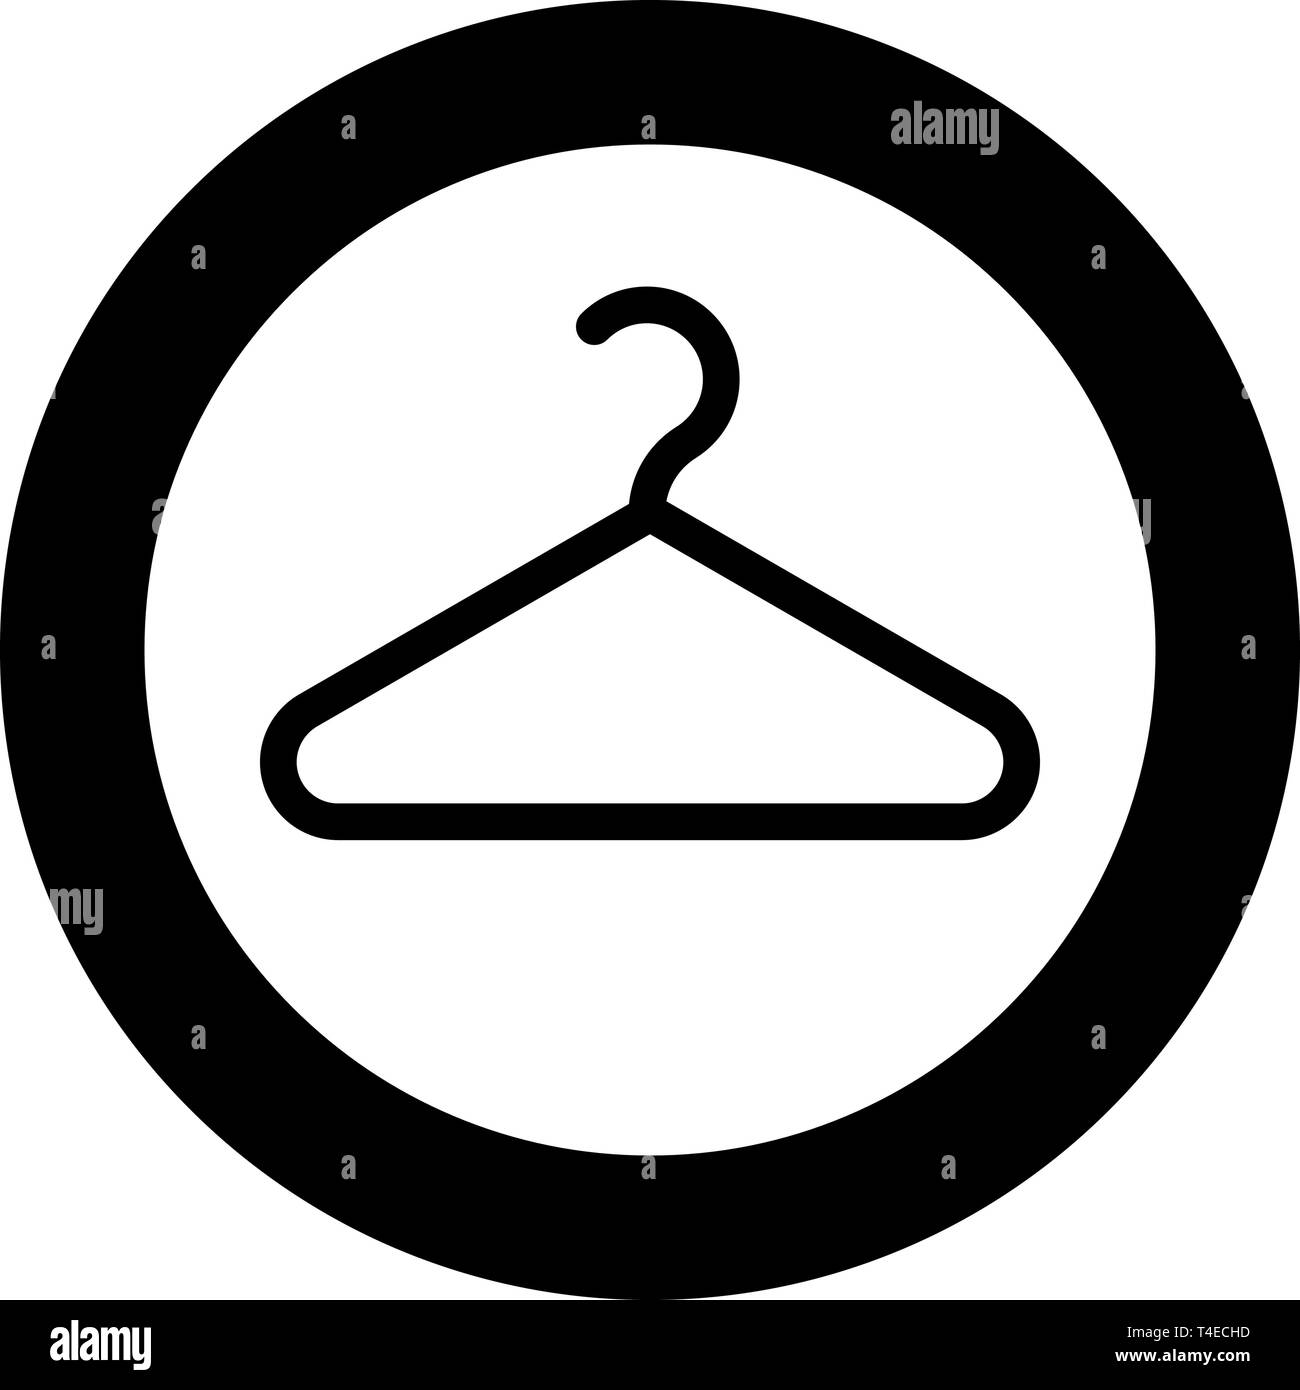 Hanger Clothes hanger icon in circle round black color vector illustration flat style simple image Stock Vector